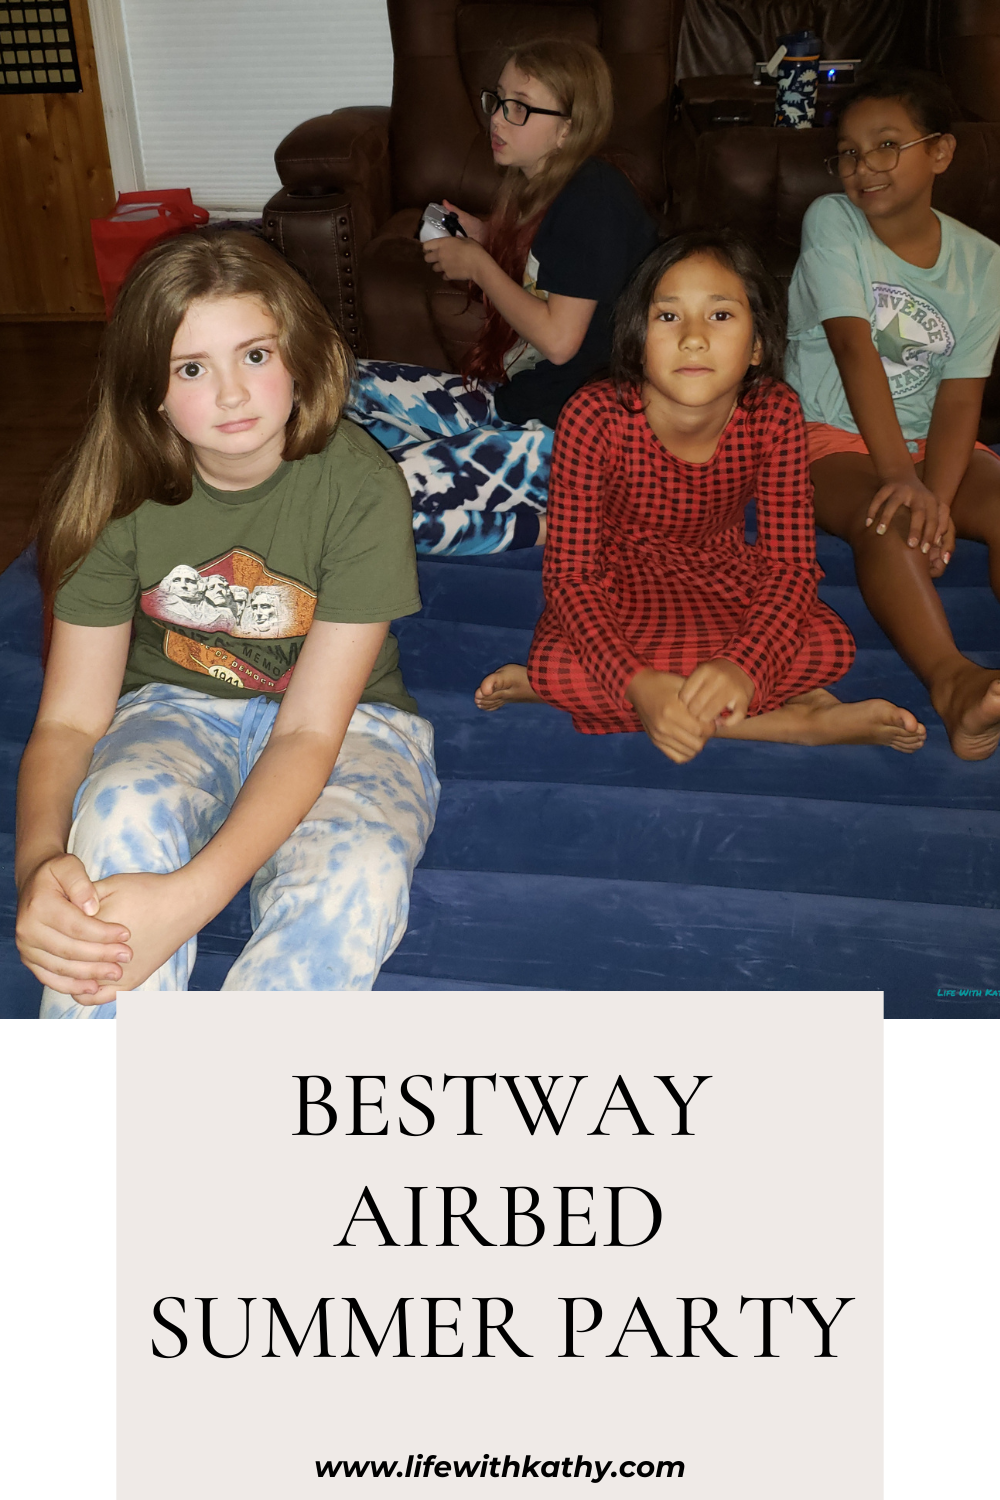 Bestway Airbed Summer Party - Life With Kathy